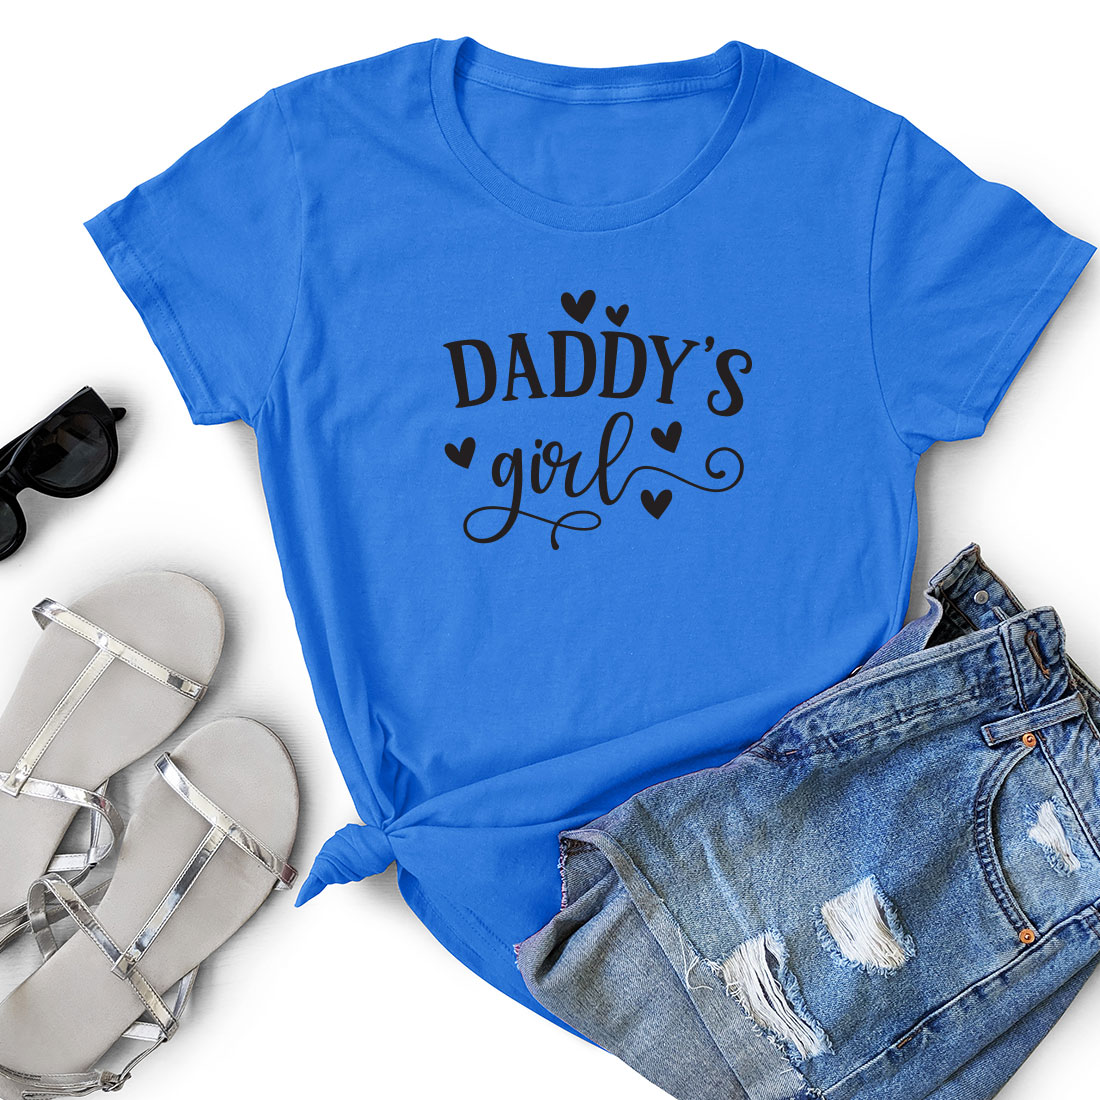 T - shirt that says daddy's girl next to a pair of shorts.